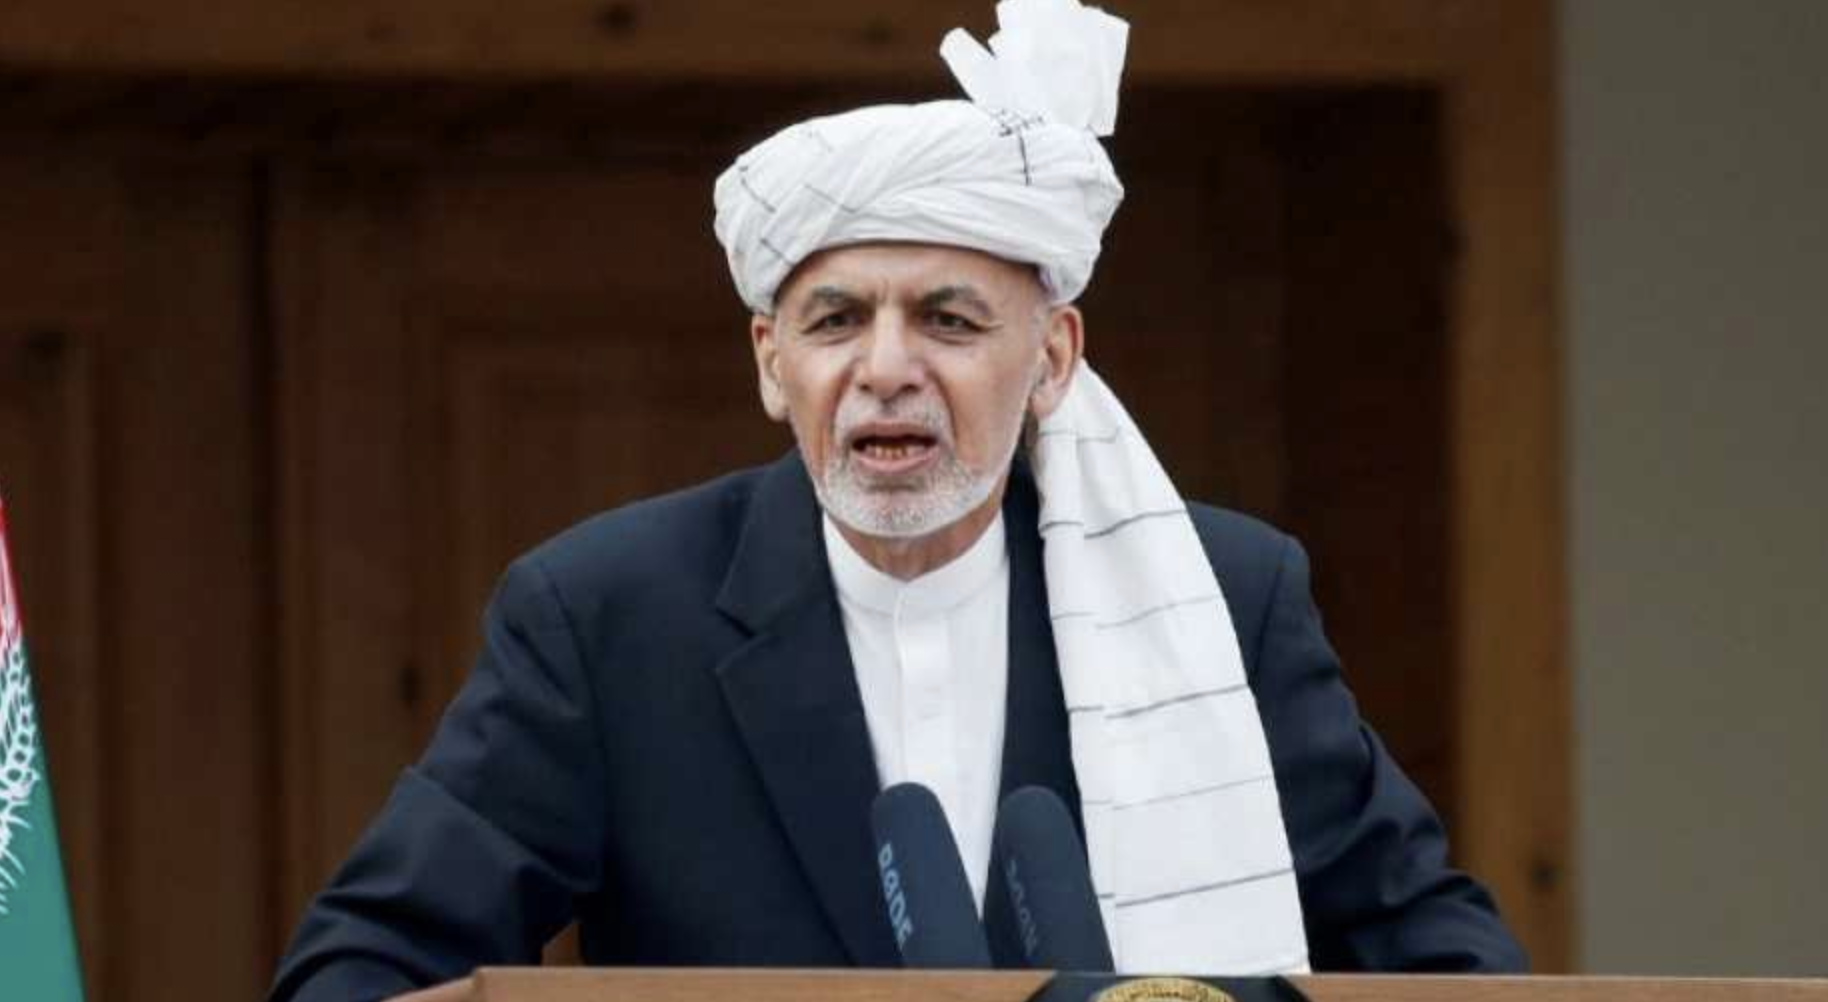 Afghan President Ghani Pledges to Release up to 2,000 Taliban Prisoners